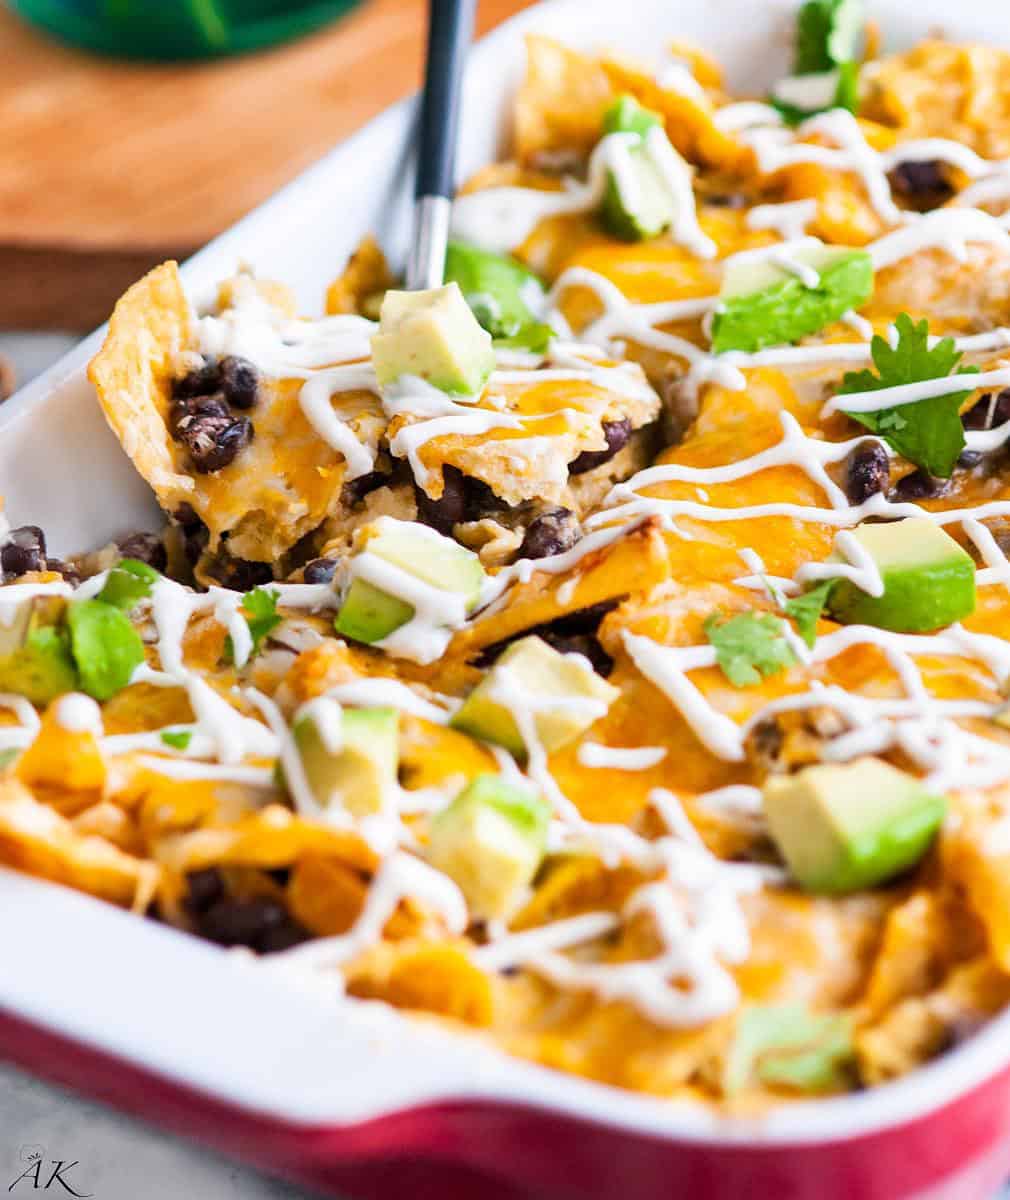  This enchilada casserole is sure to be a hit with vegans and meat-lovers alike.